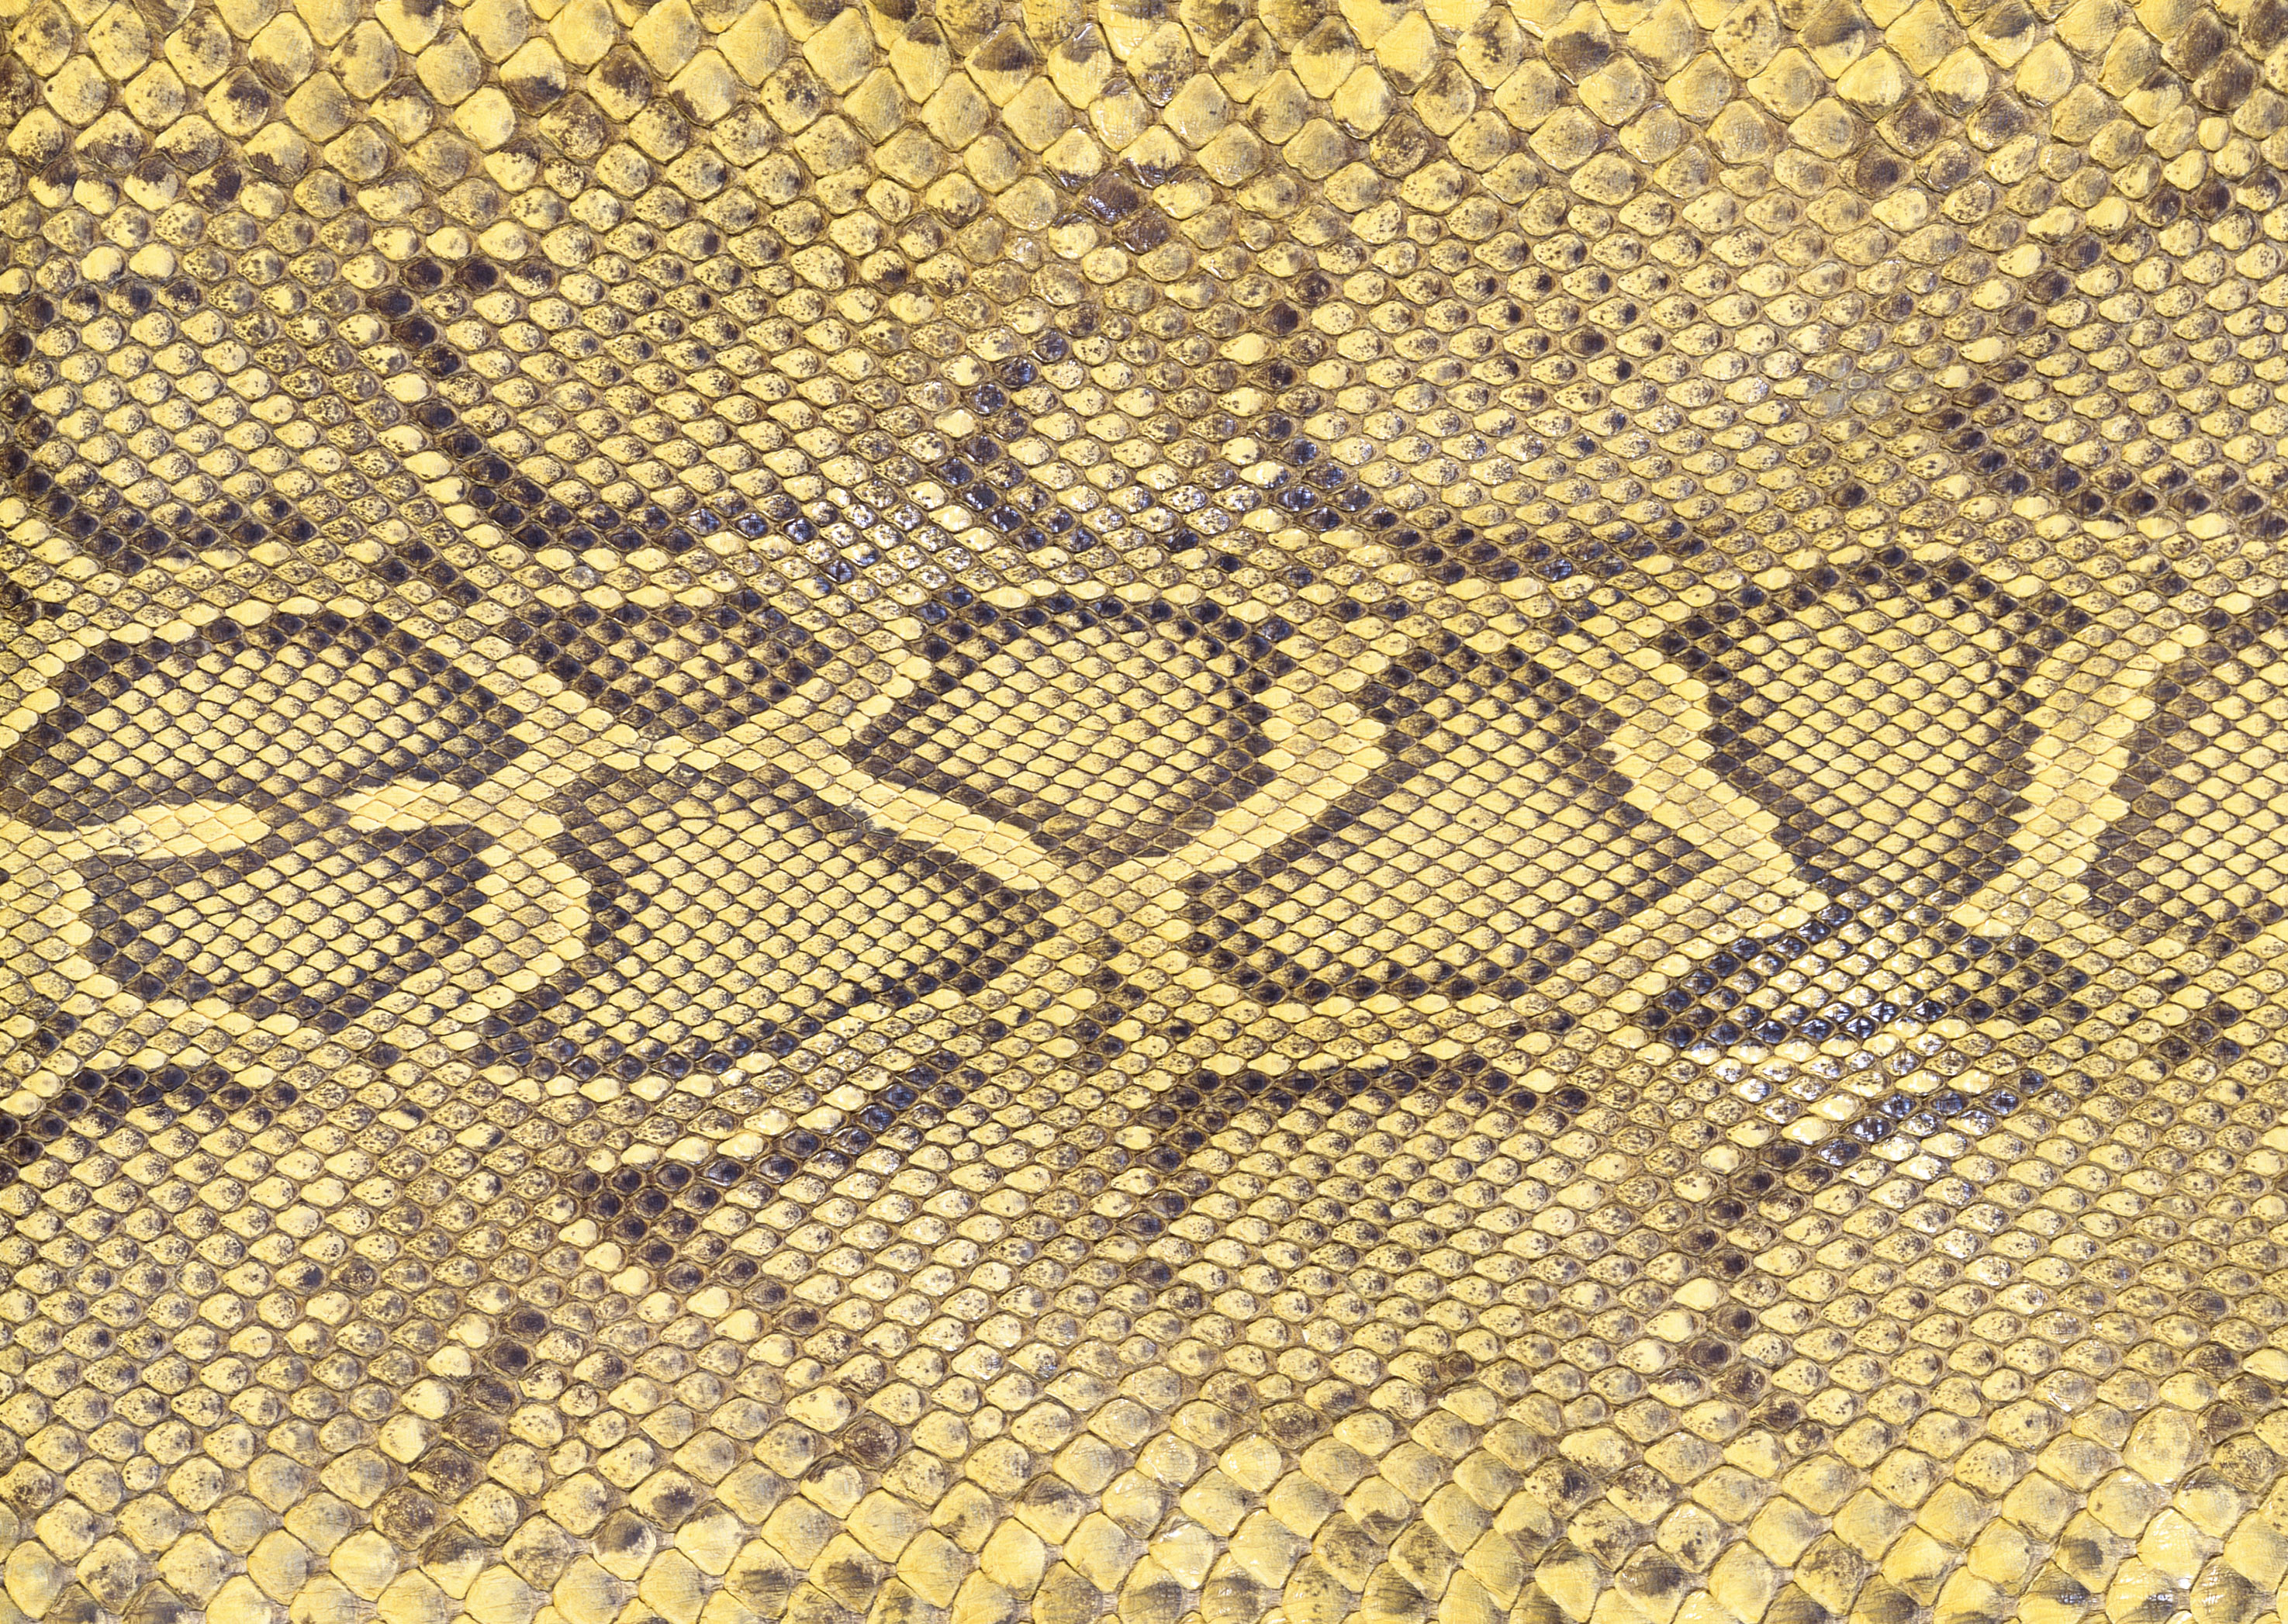 Snake leather texture background image download, snakes